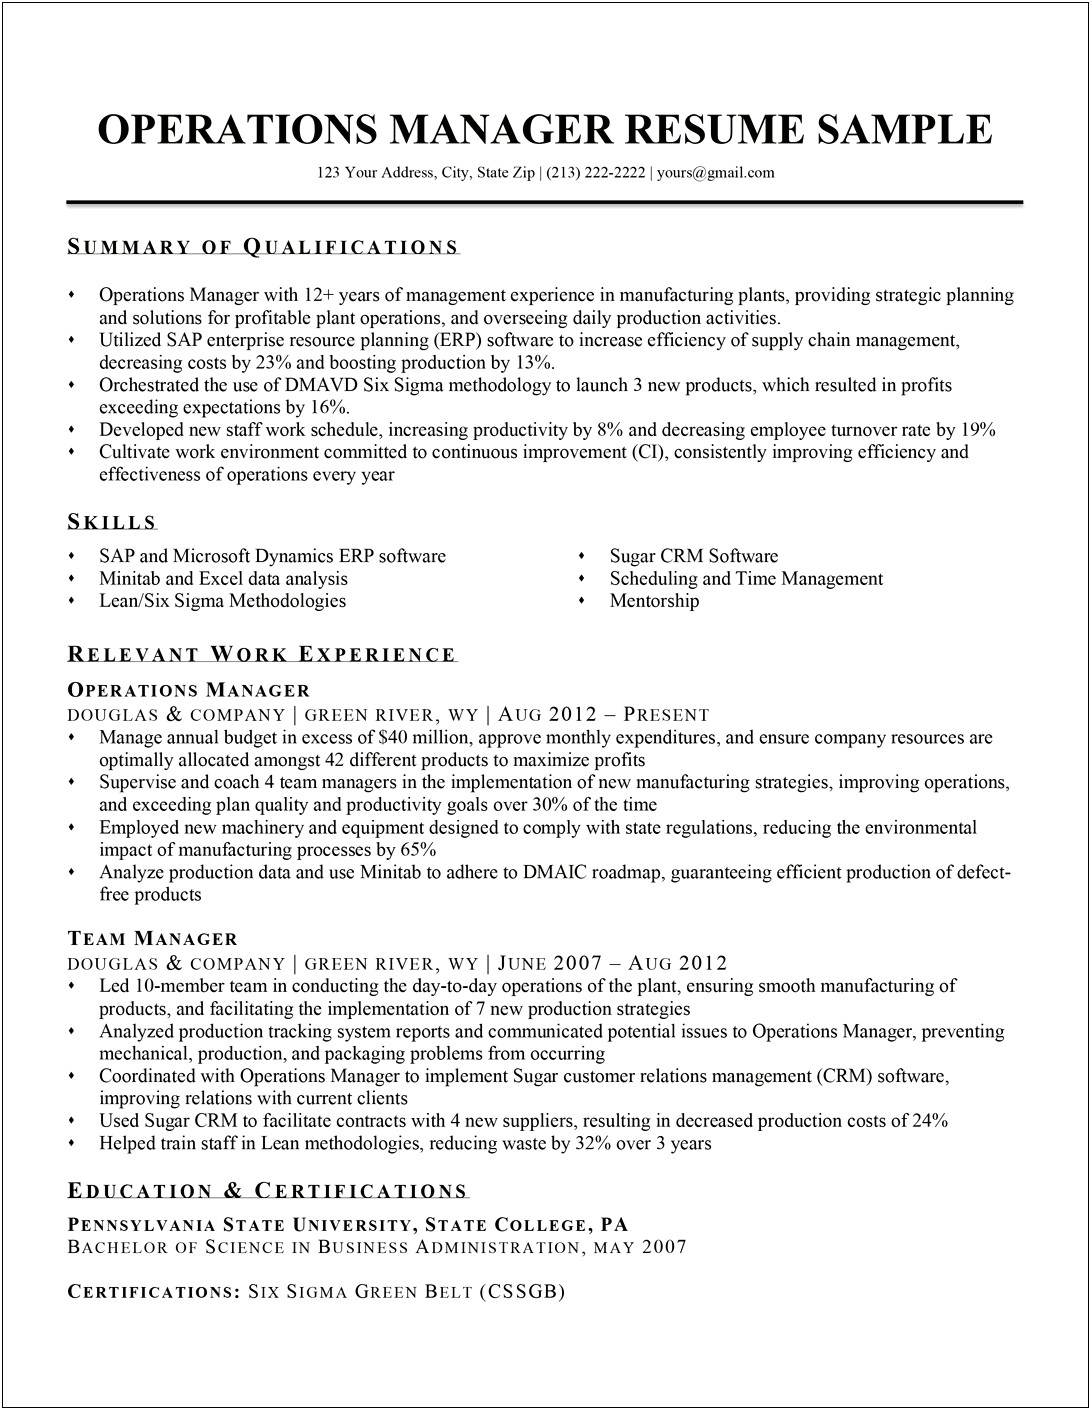 Sample Resume Objective For Operations Manager